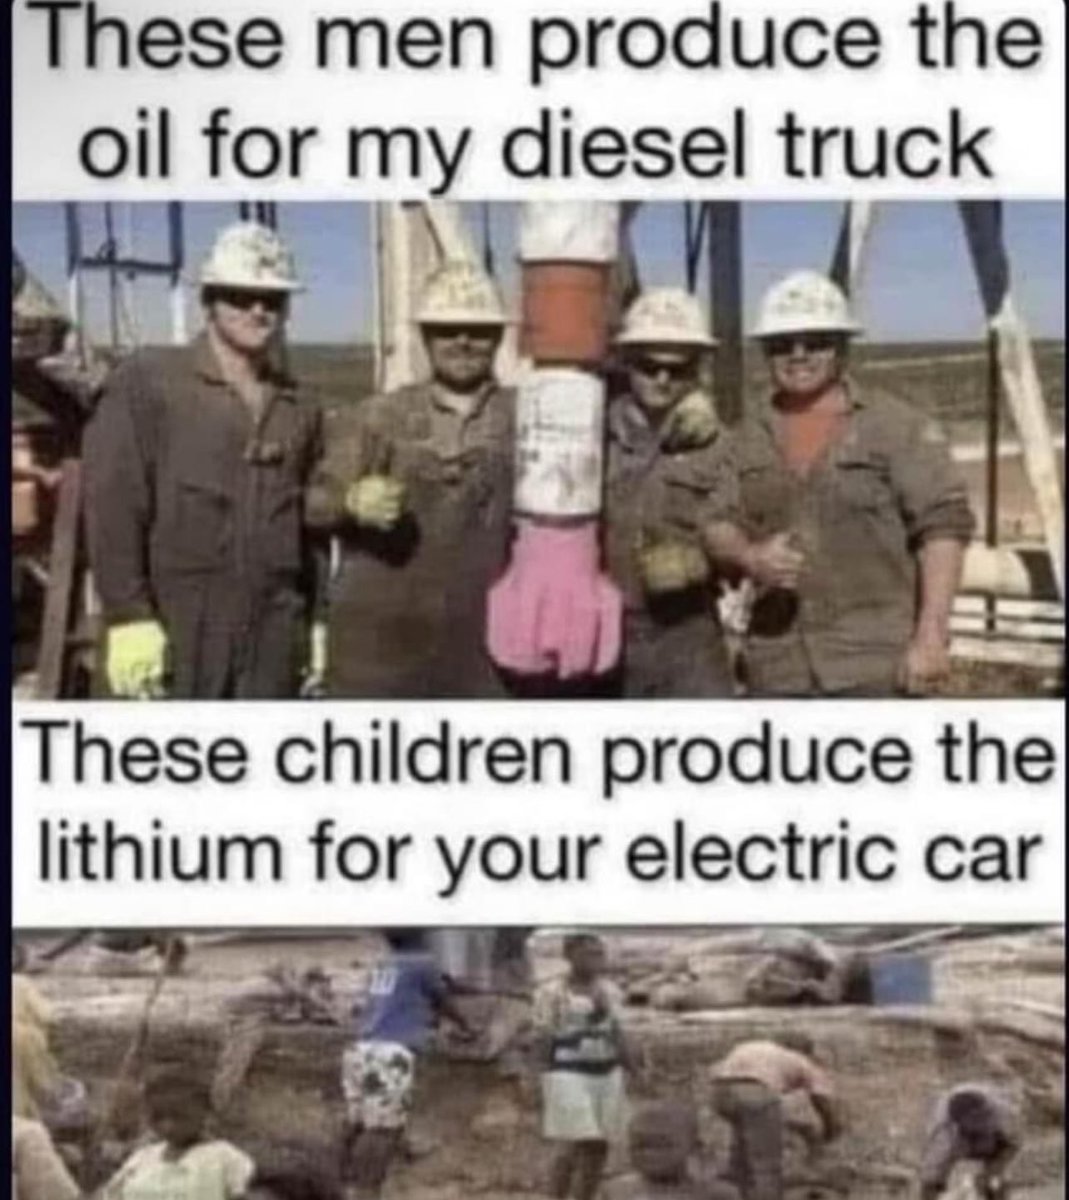 Fuck your #ElectricCar 🖕🖕🖕

You better be getting these #children pensions so they never have to work again